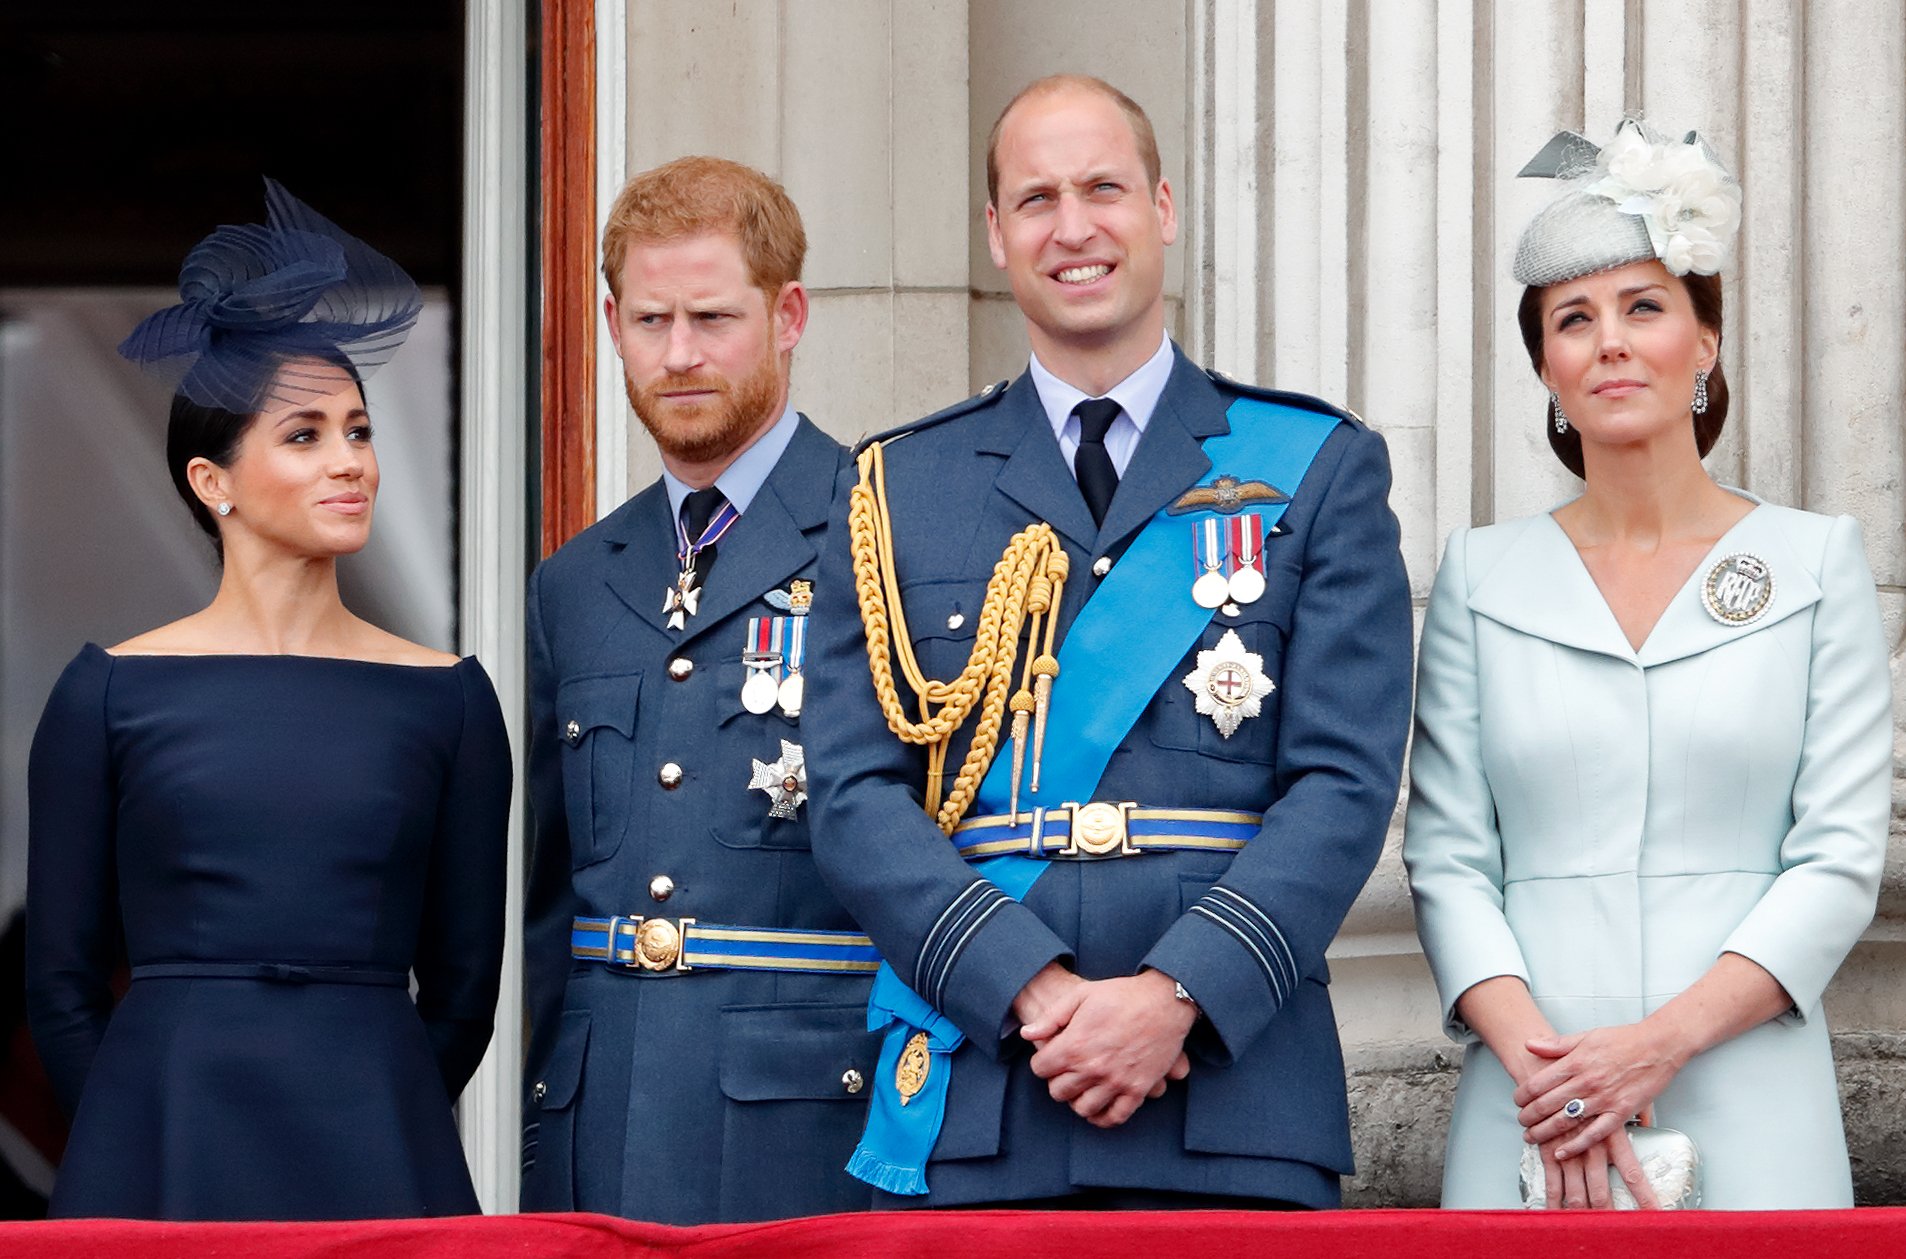 Meghan, Duchess of Sussex, Prince Harry, Duke of Sussex, Prince William, Duke of Cambridge and Catherine, Duchess of Cambridge watch a flypast to mark the centenary of the Royal Air Force from the balcony of Buckingham Palace on July 10, 2018 in London, England | Source: Getty Images 